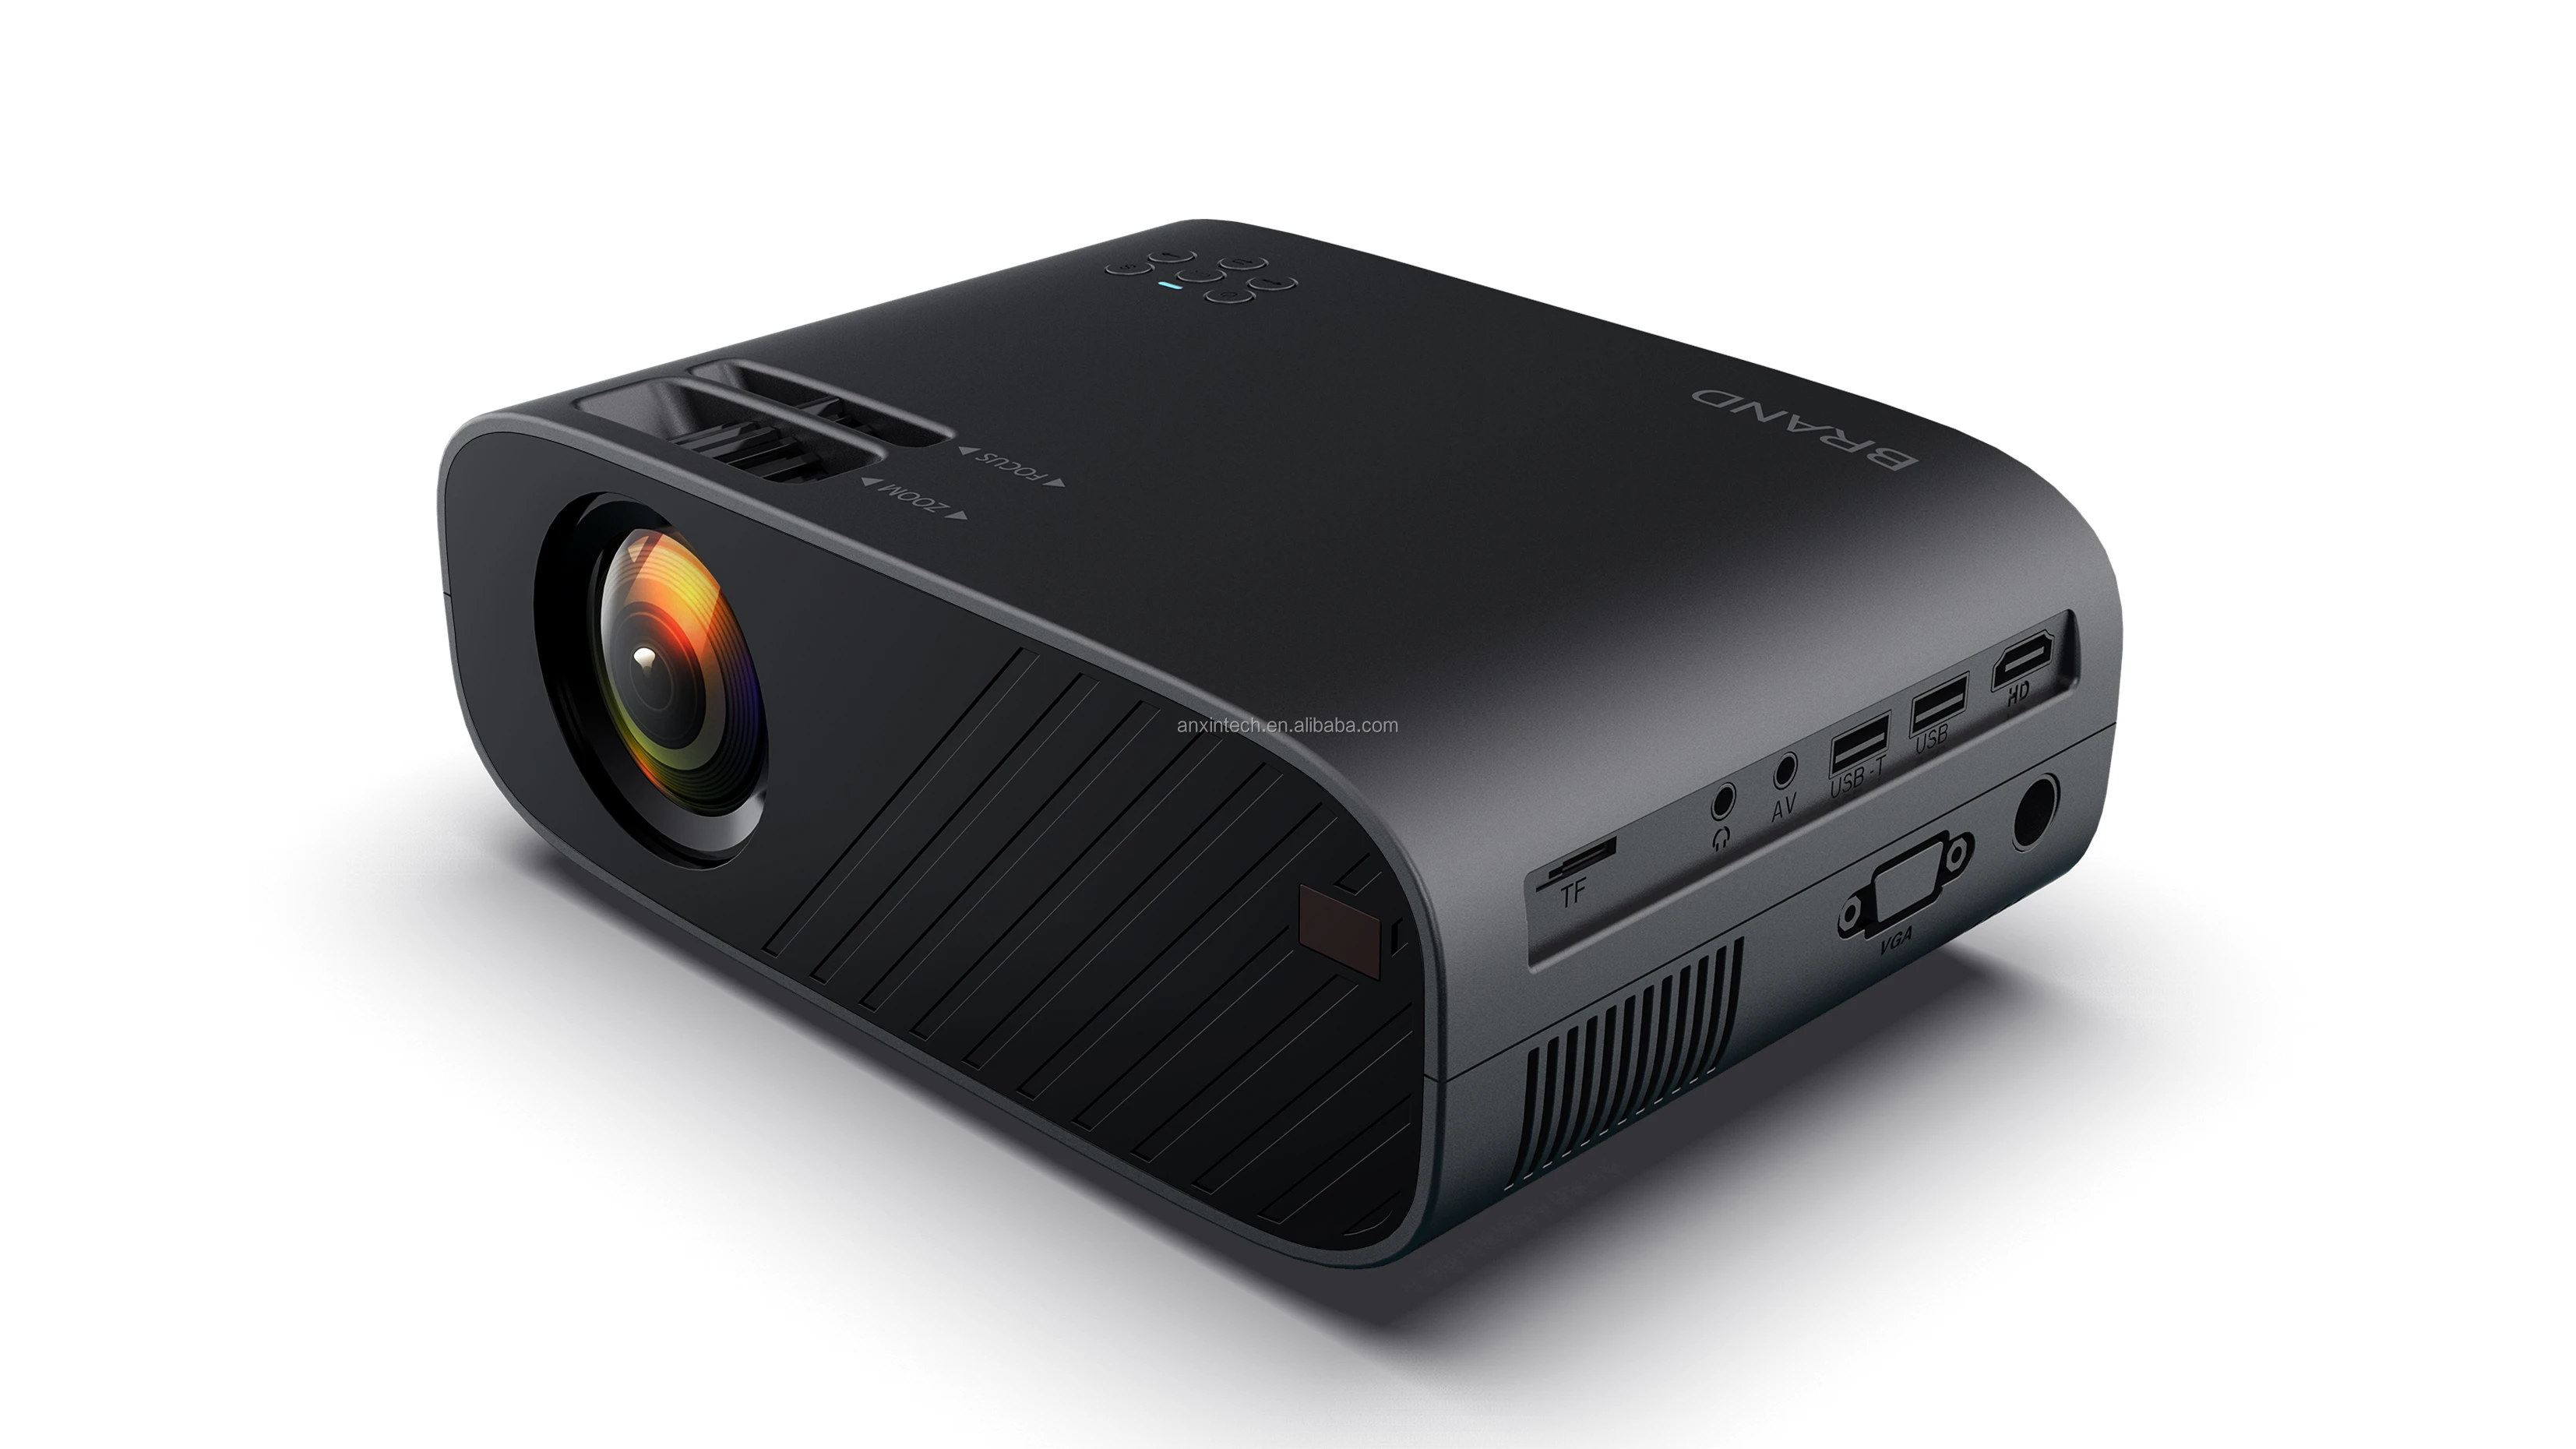 Anxin AN12 720p mini projector Amazon Wish Joom hot sale projector can upgrade same screen or android projector